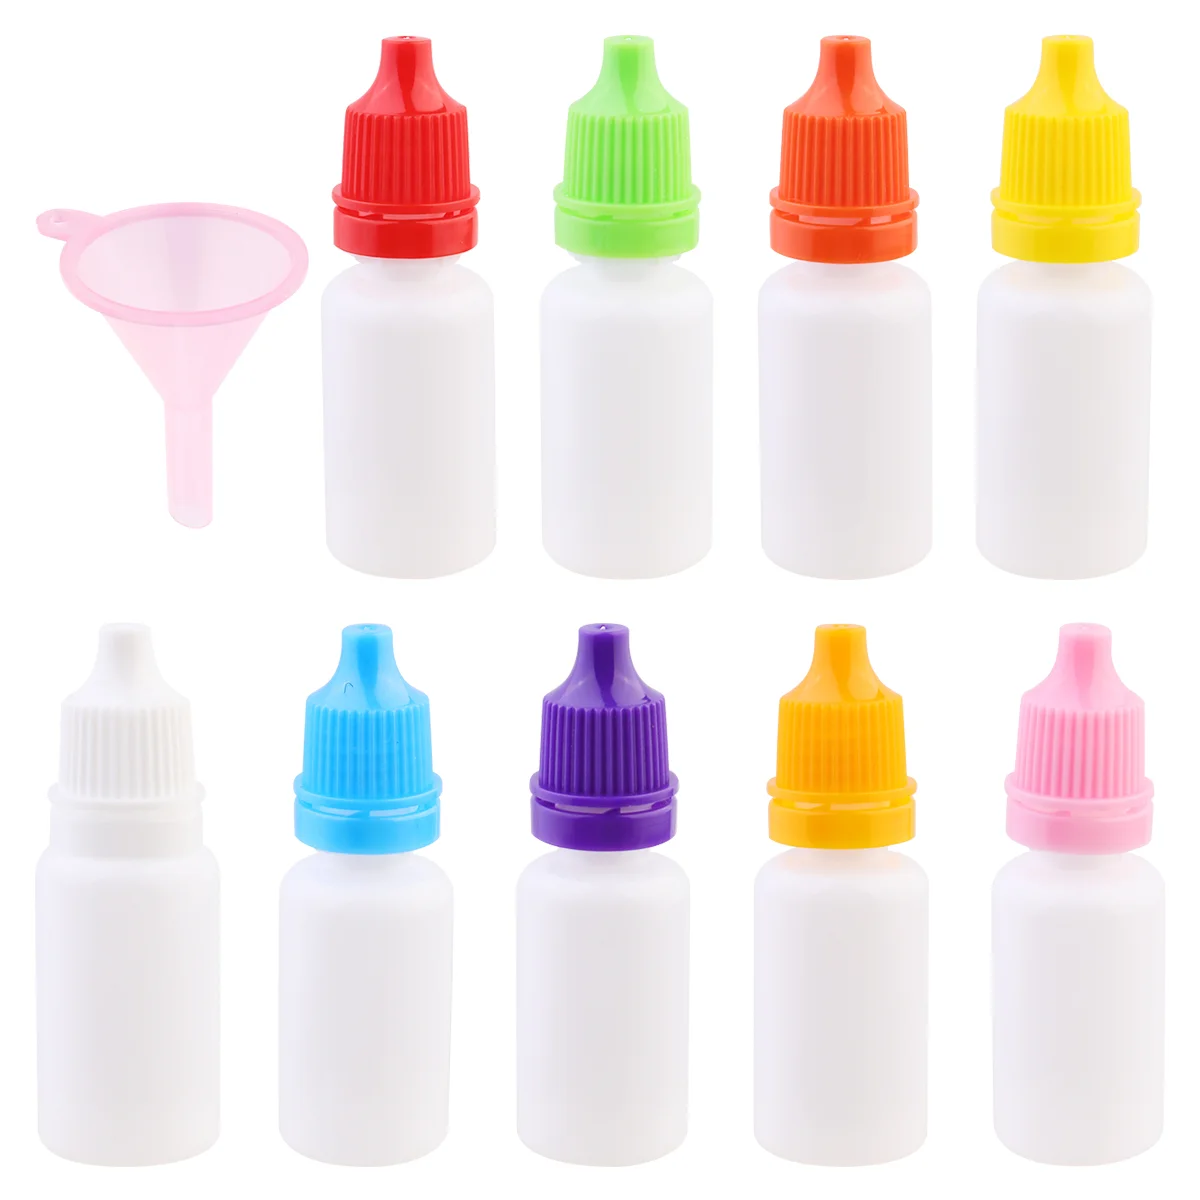 

10 Ml Container Eye Drops Bottle Plastic Go Containers Liquid Dropper Eyedrops Funnel